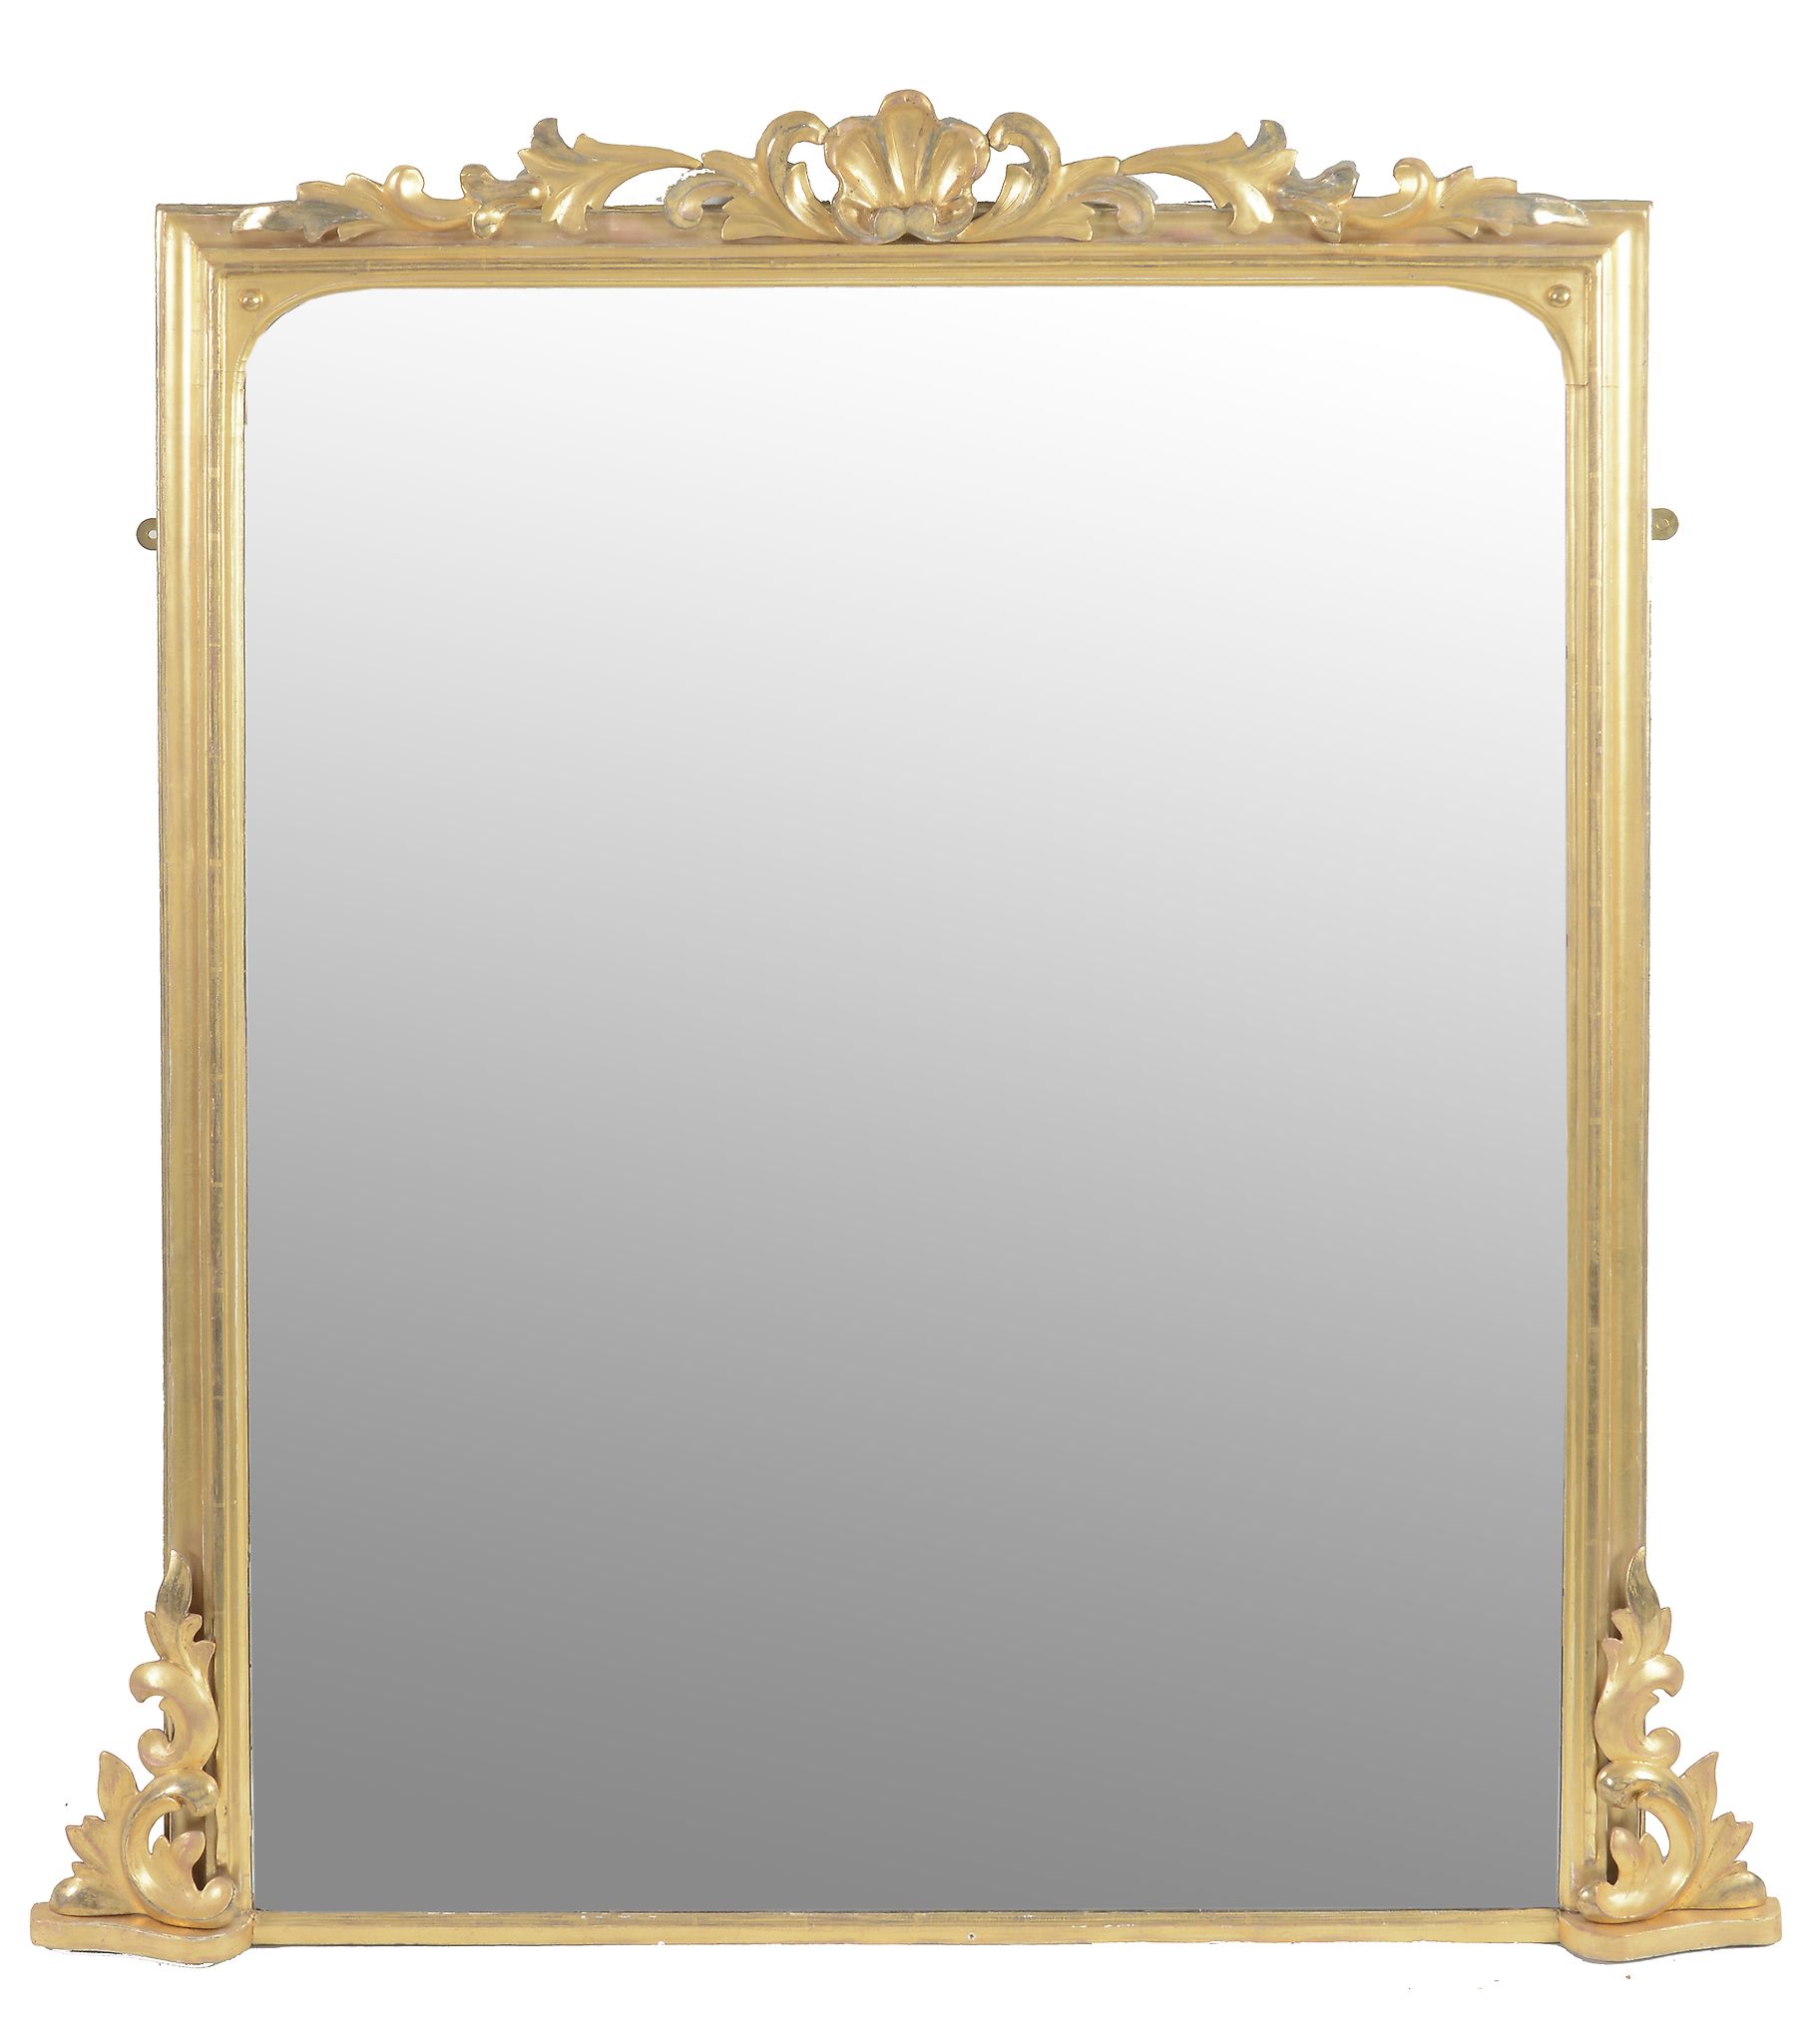 An early Victorian giltwood overmantel mirror, circa 1840  An early Victorian giltwood overmantel